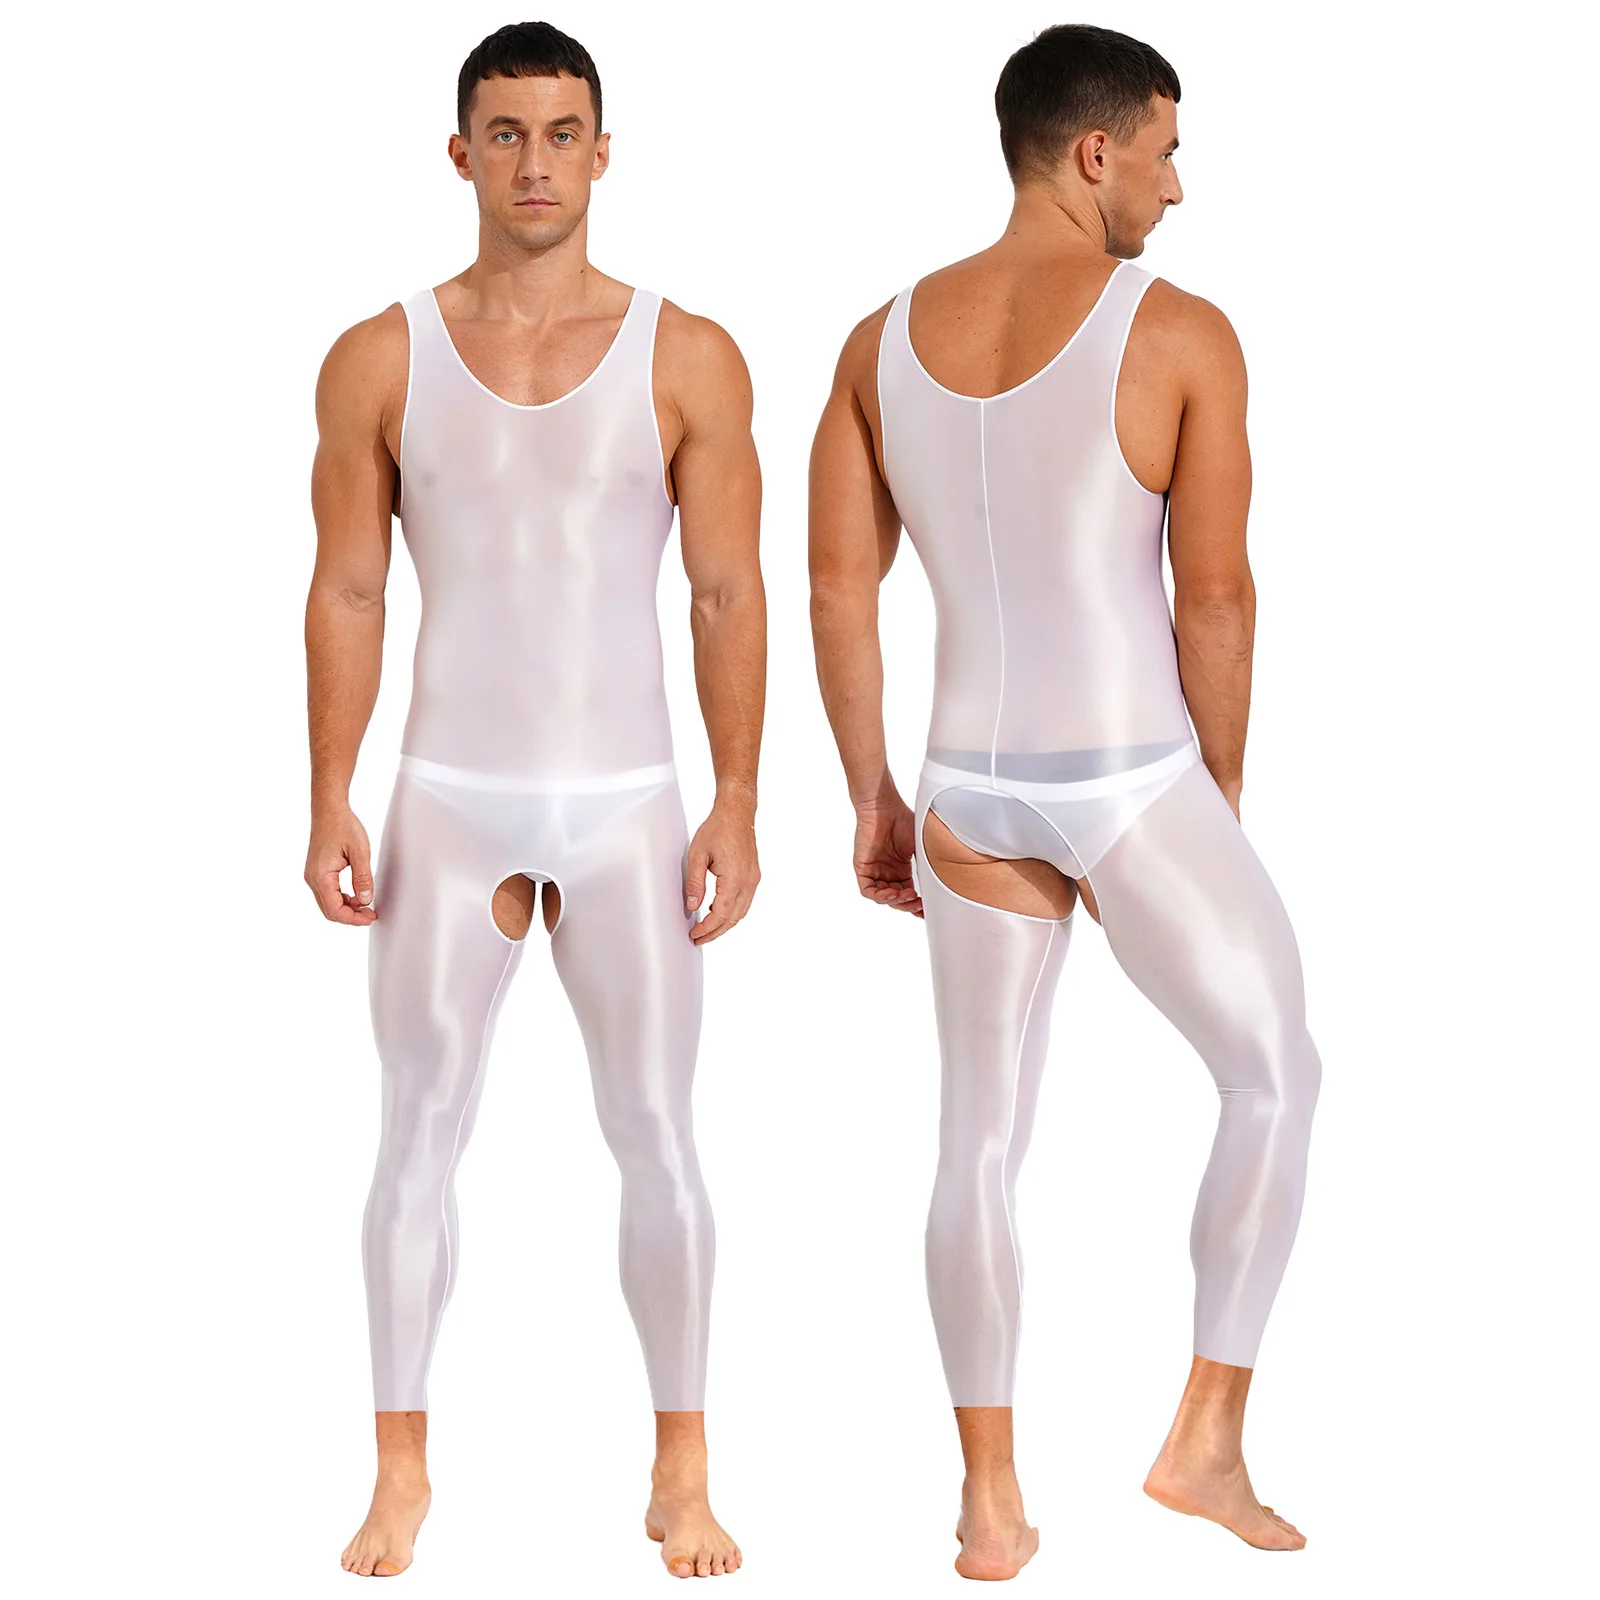 

Mens Sexy Crotchless Bodysuit Sleeveless Solid Glossy Stretchy Tights Rave Party Nightclub Pole Dancing Jumpsuits Sleepwear